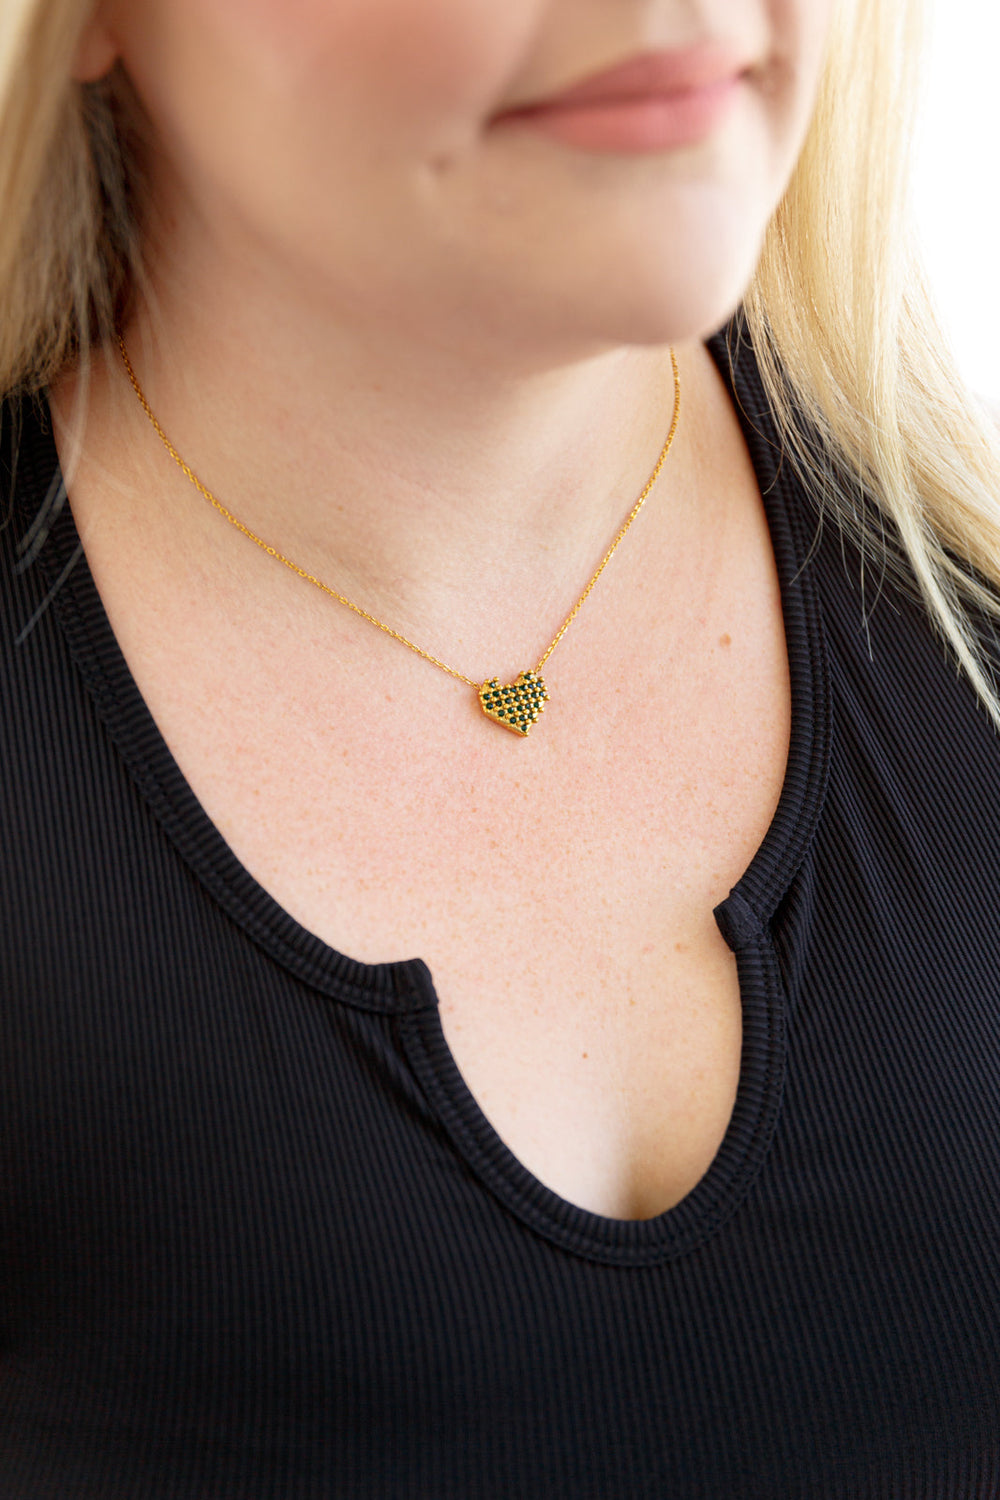 Women's Heart Necklace | Heart Necklace | MyTrendyTees